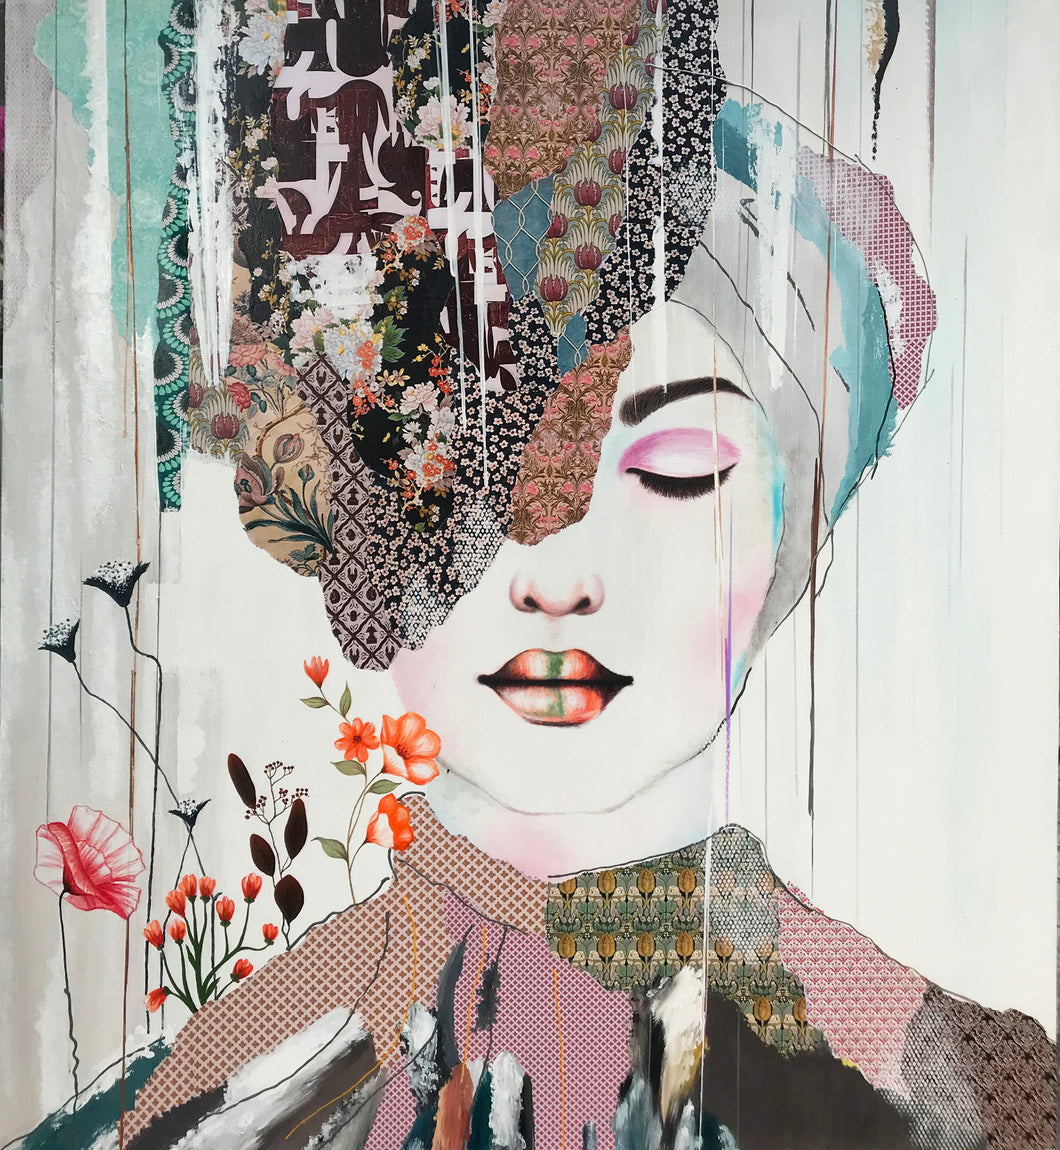 “Showing Up” By Irene Hoff, Mixed Media on Canvas